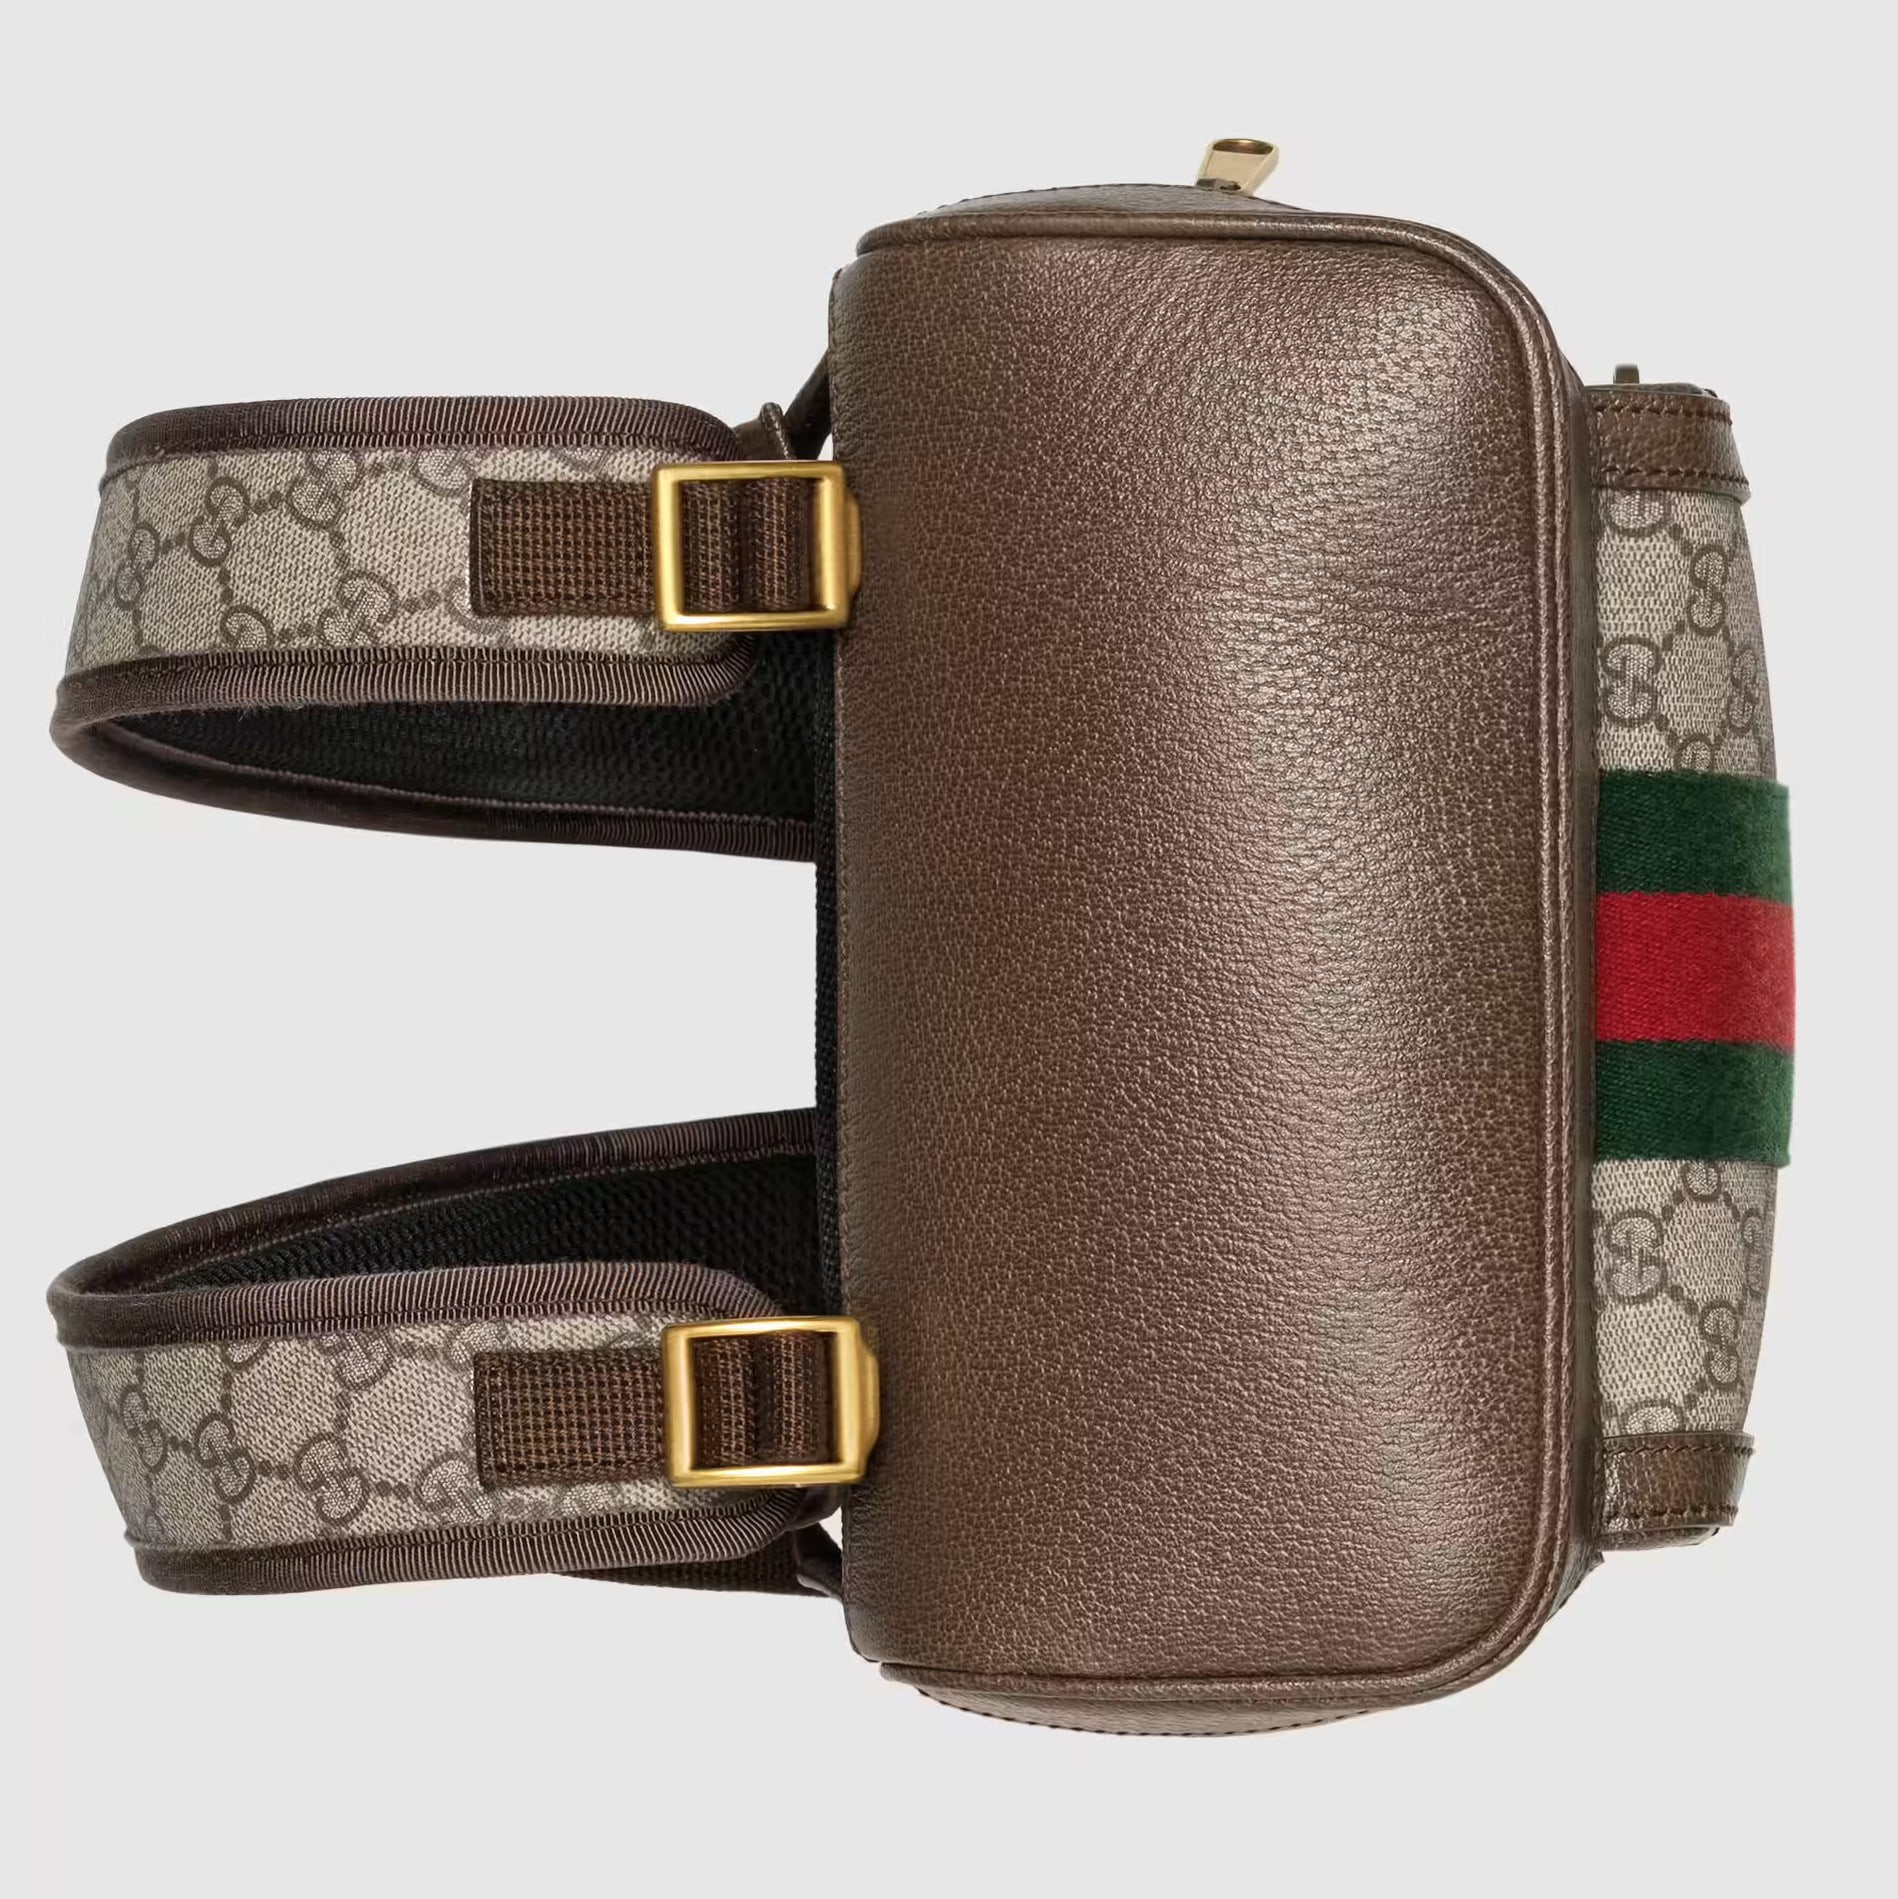 BALO UNISEX GUCCI OPHIDIA GG SMALL BACKPACK 15